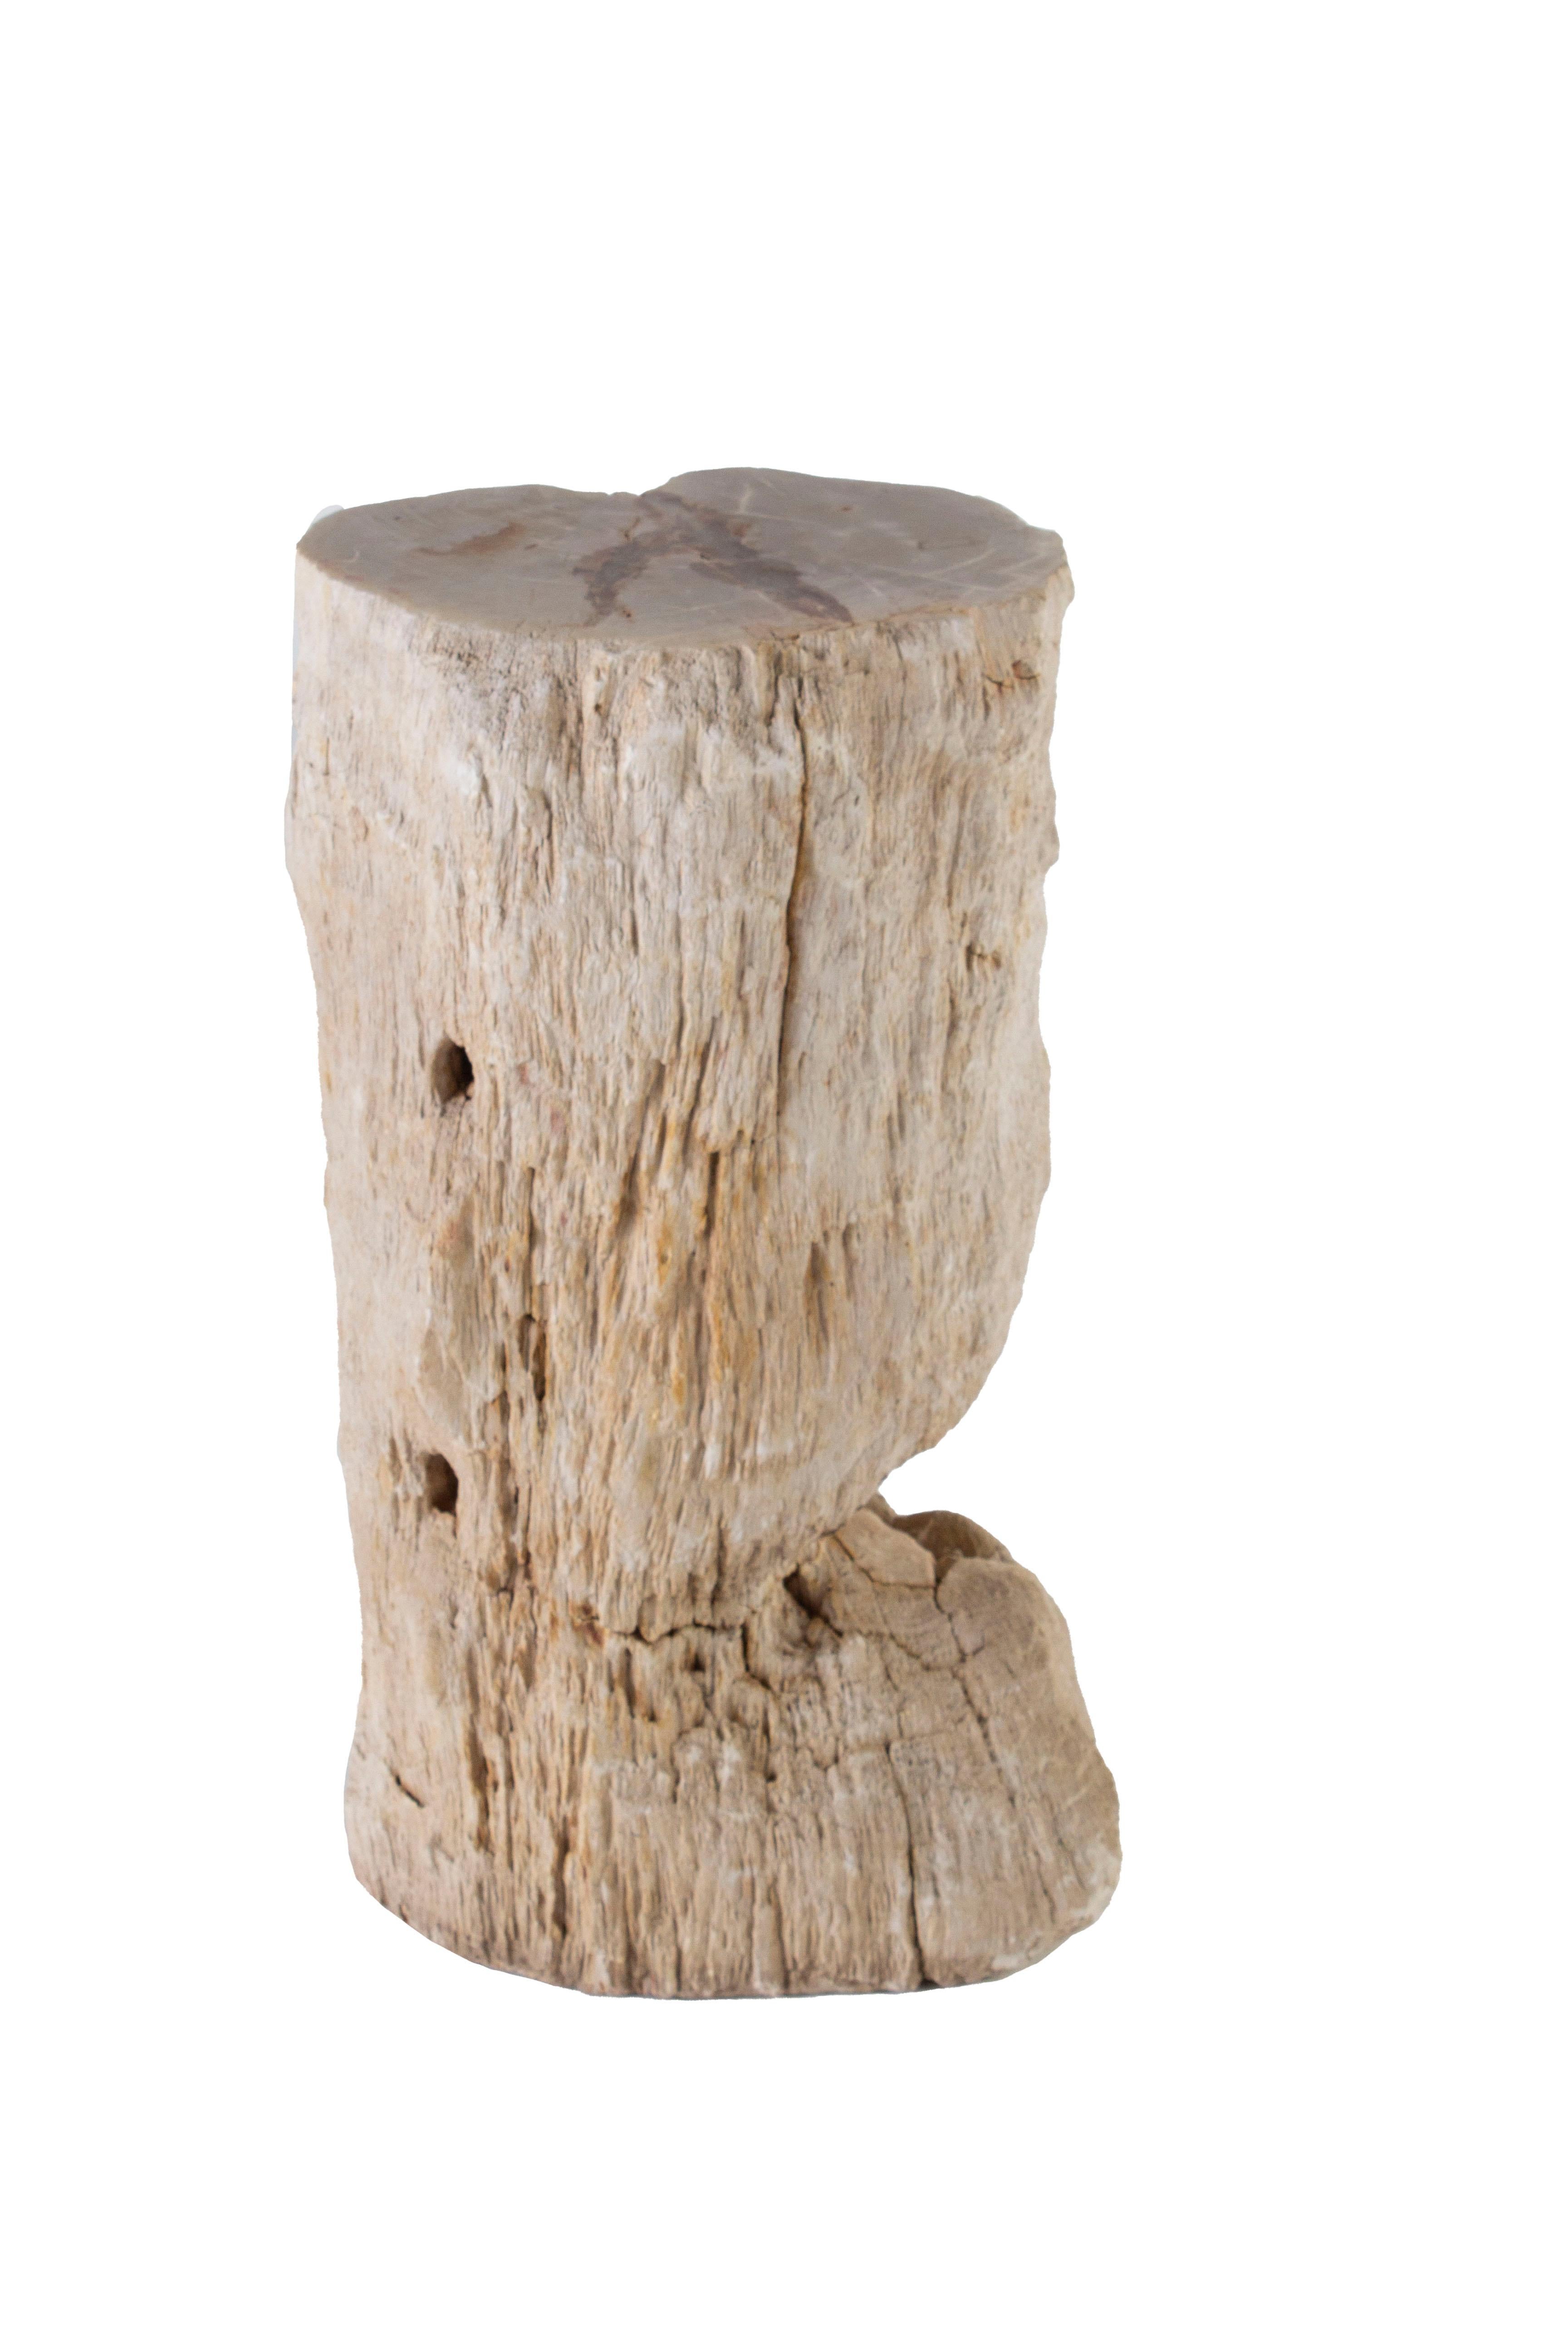 Petrified Wood Stump Pedestal

Piece from our one-of-a-kind collection, Le Monde. Exclusive to Brendan Bass.   

Globally curated by Brendan Bass, Le Monde furniture and accessories offer modern sensibility, provincial construction, and unparalleled